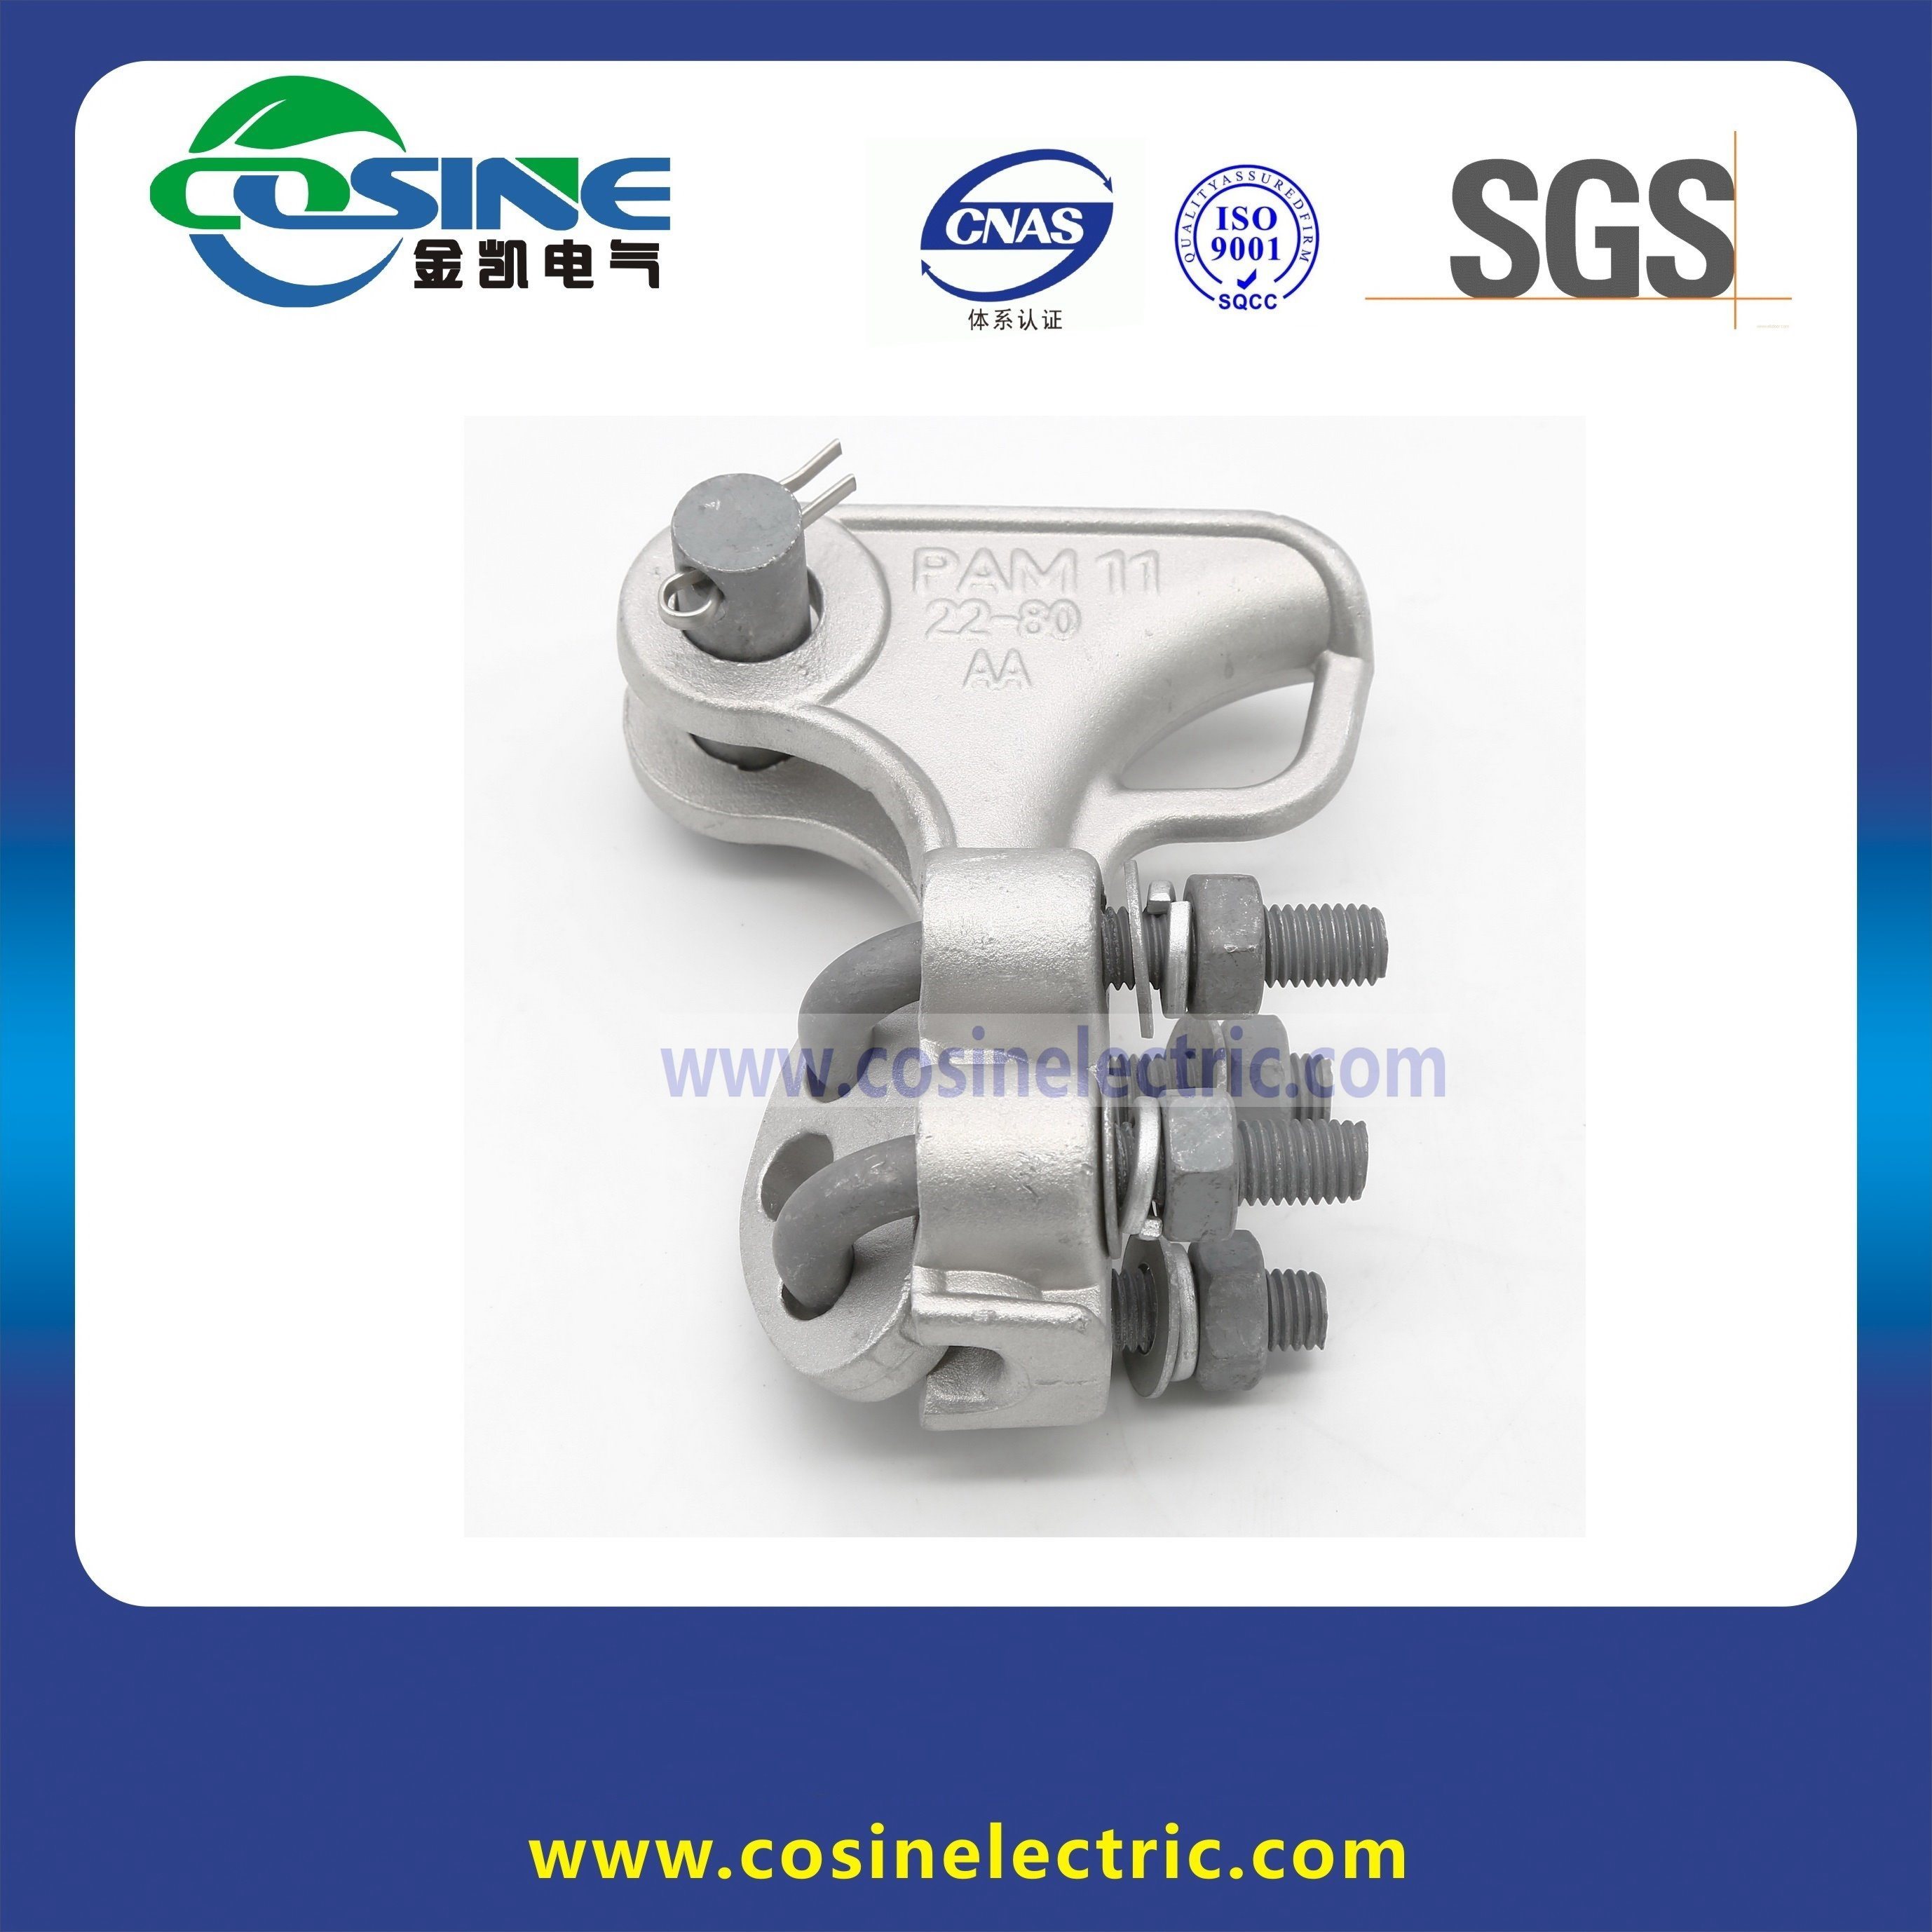 Tension Clamp/ Aluminum Alloy Strain Tension Clamp/ PAM11